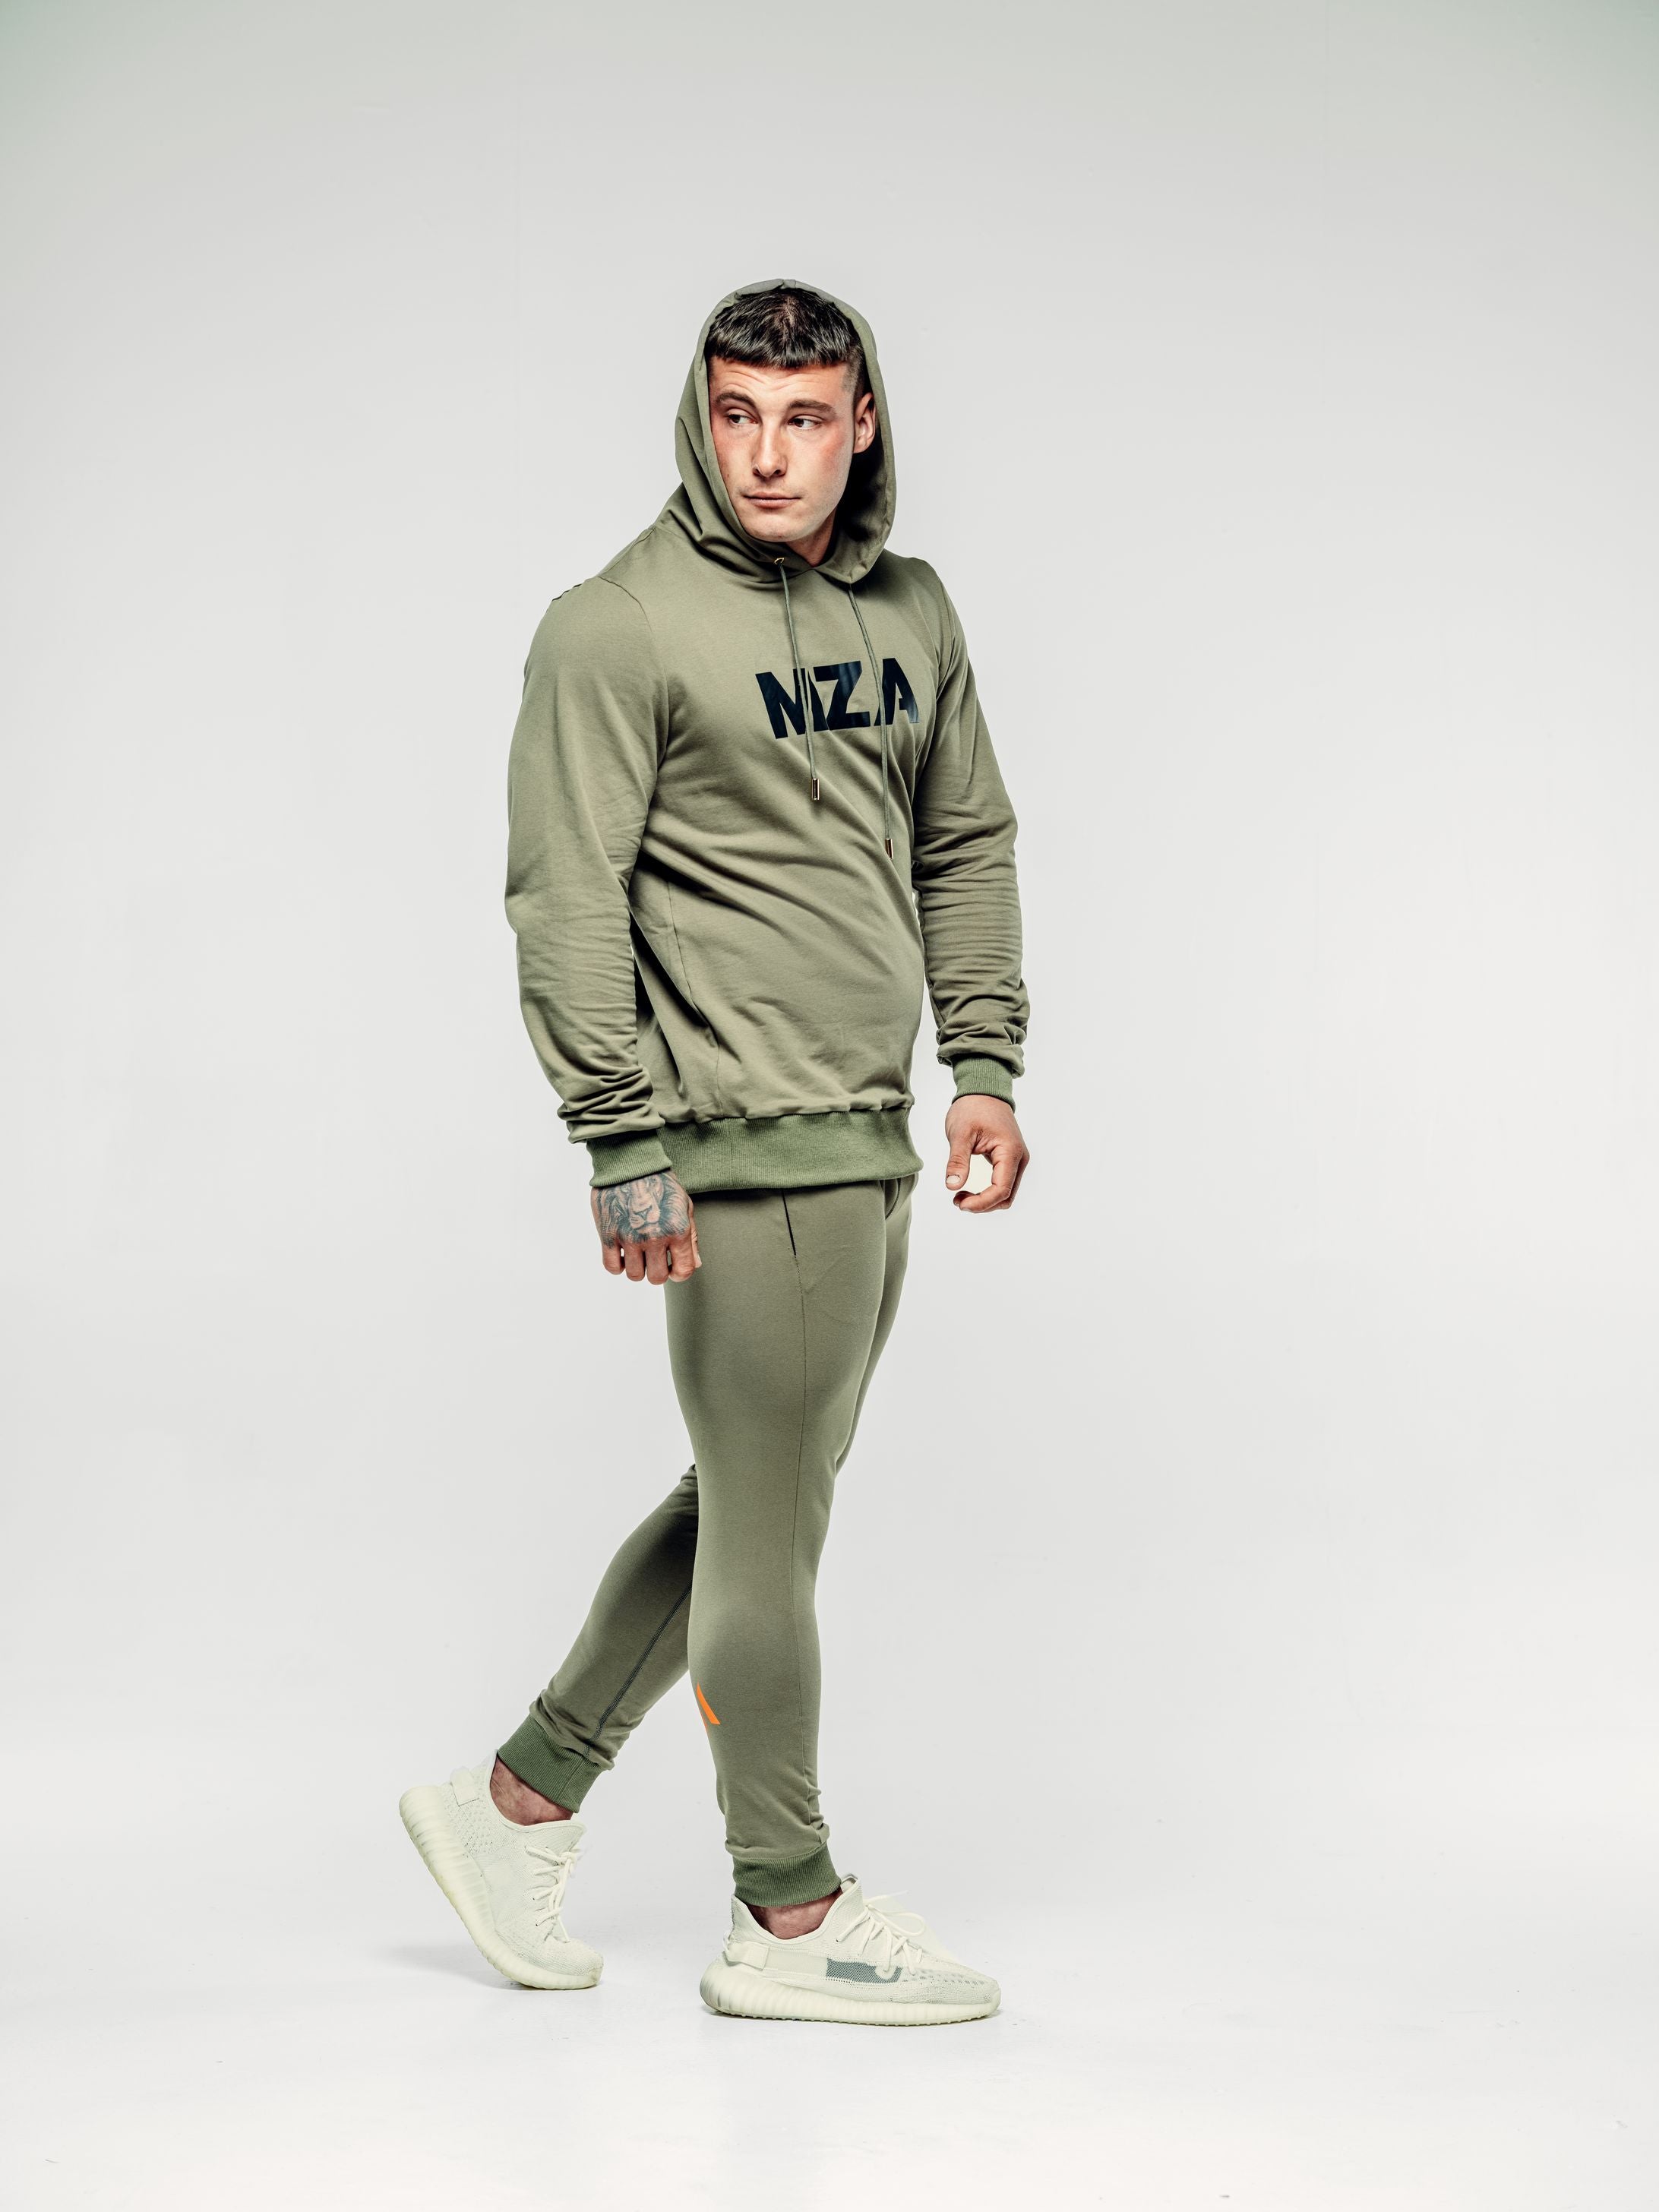 This is lewis wearing the new standard hoodie and new standard joggers khaki.  It's a side on image of Lewis walking.